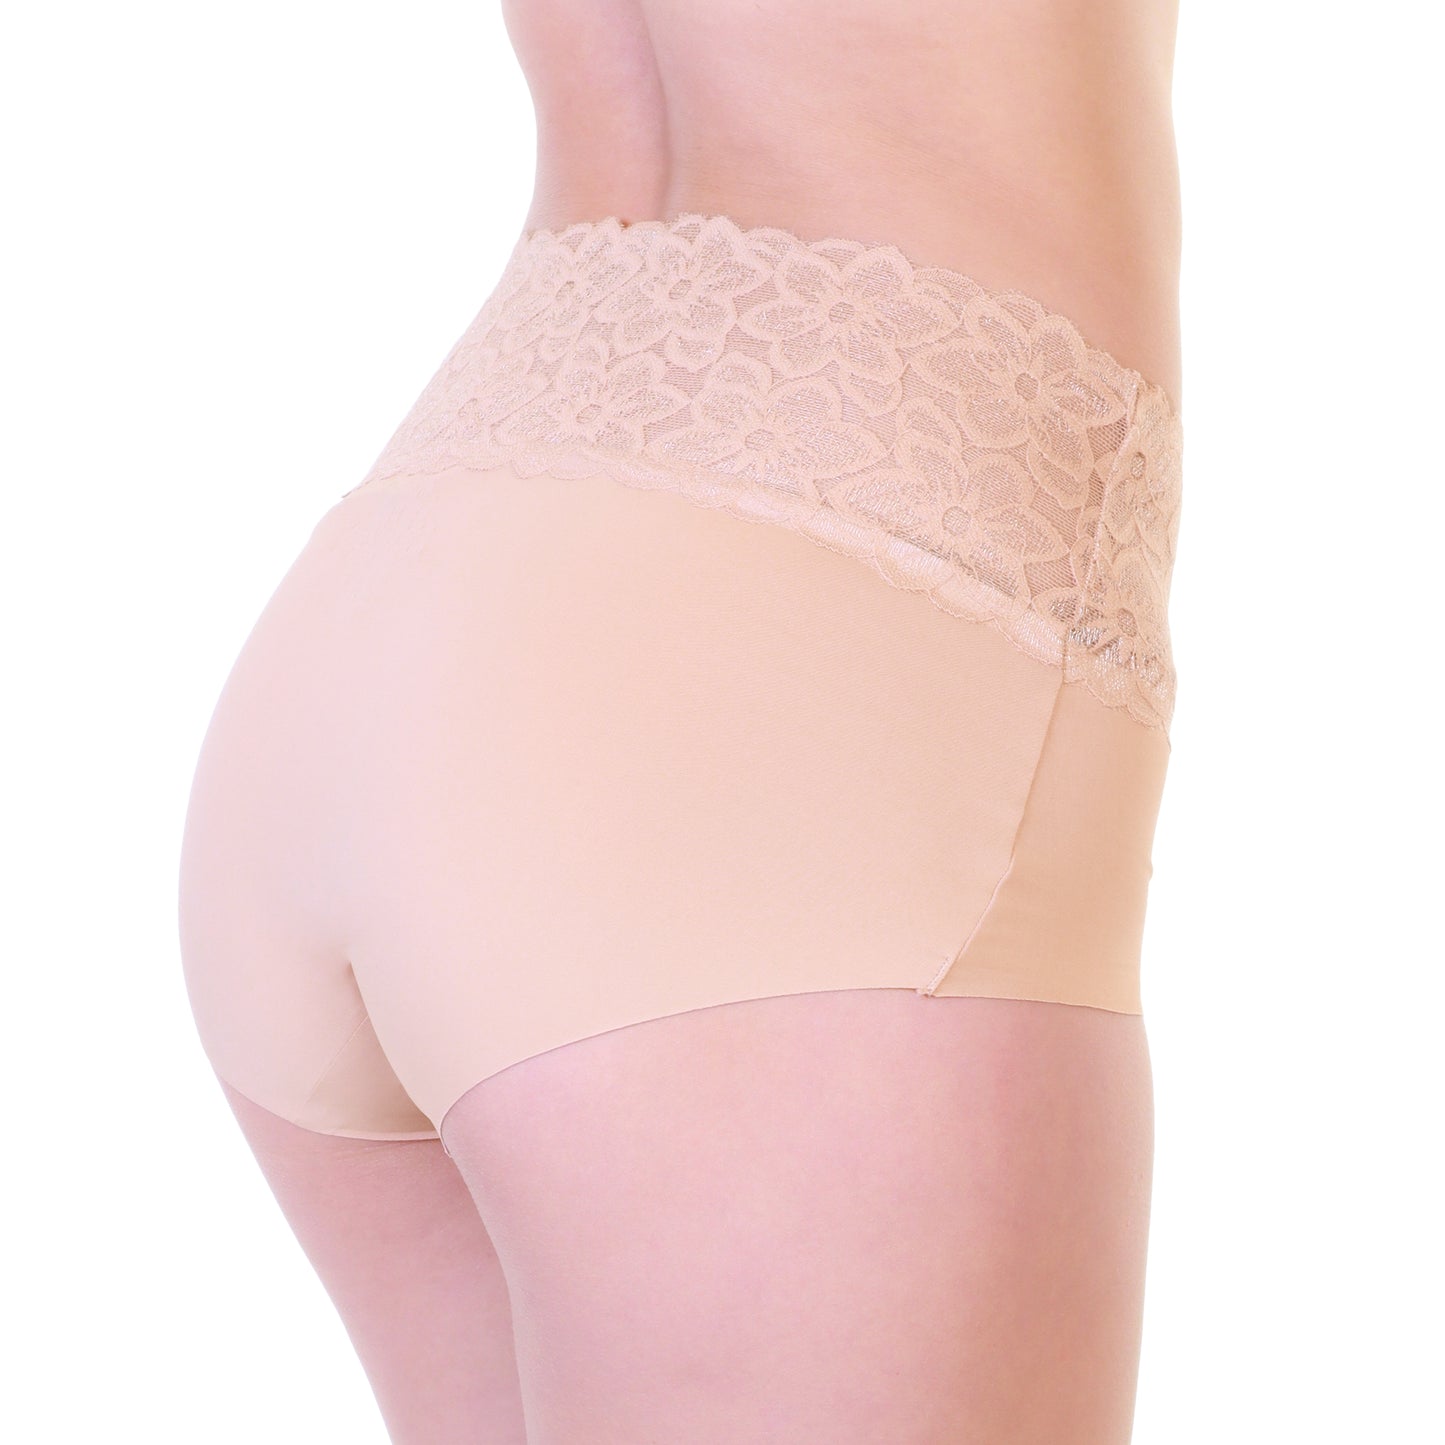 Angelina Laser Cut High-Rise Briefs with Lace Front Waistband Detail (12-Pack), #G6772